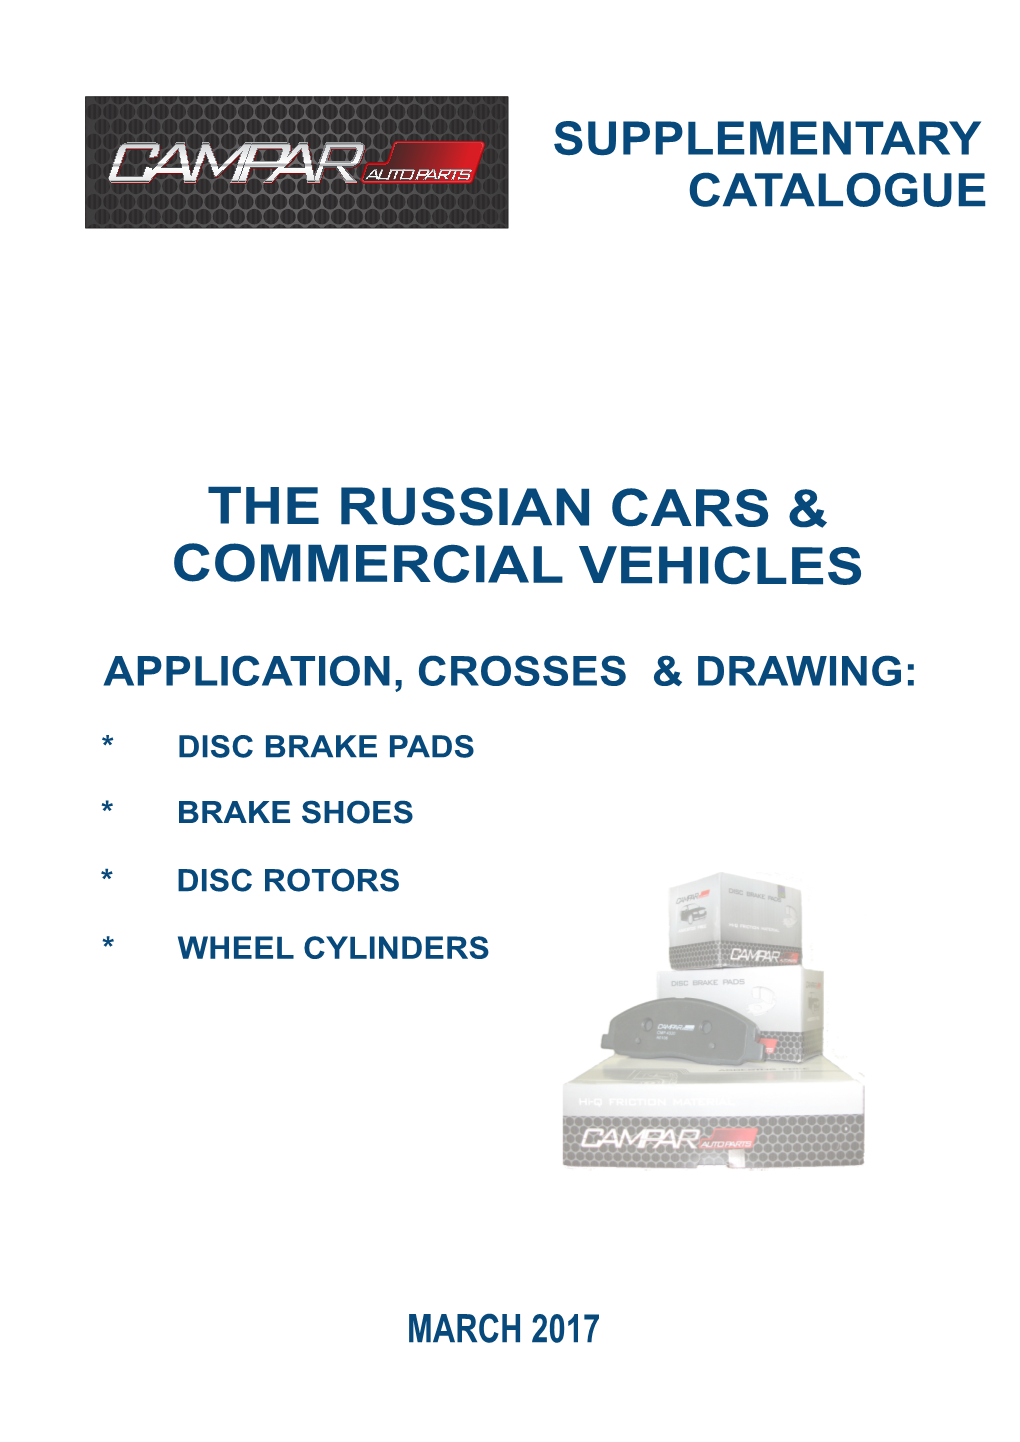 The Russian Cars & Commercial Vehicles